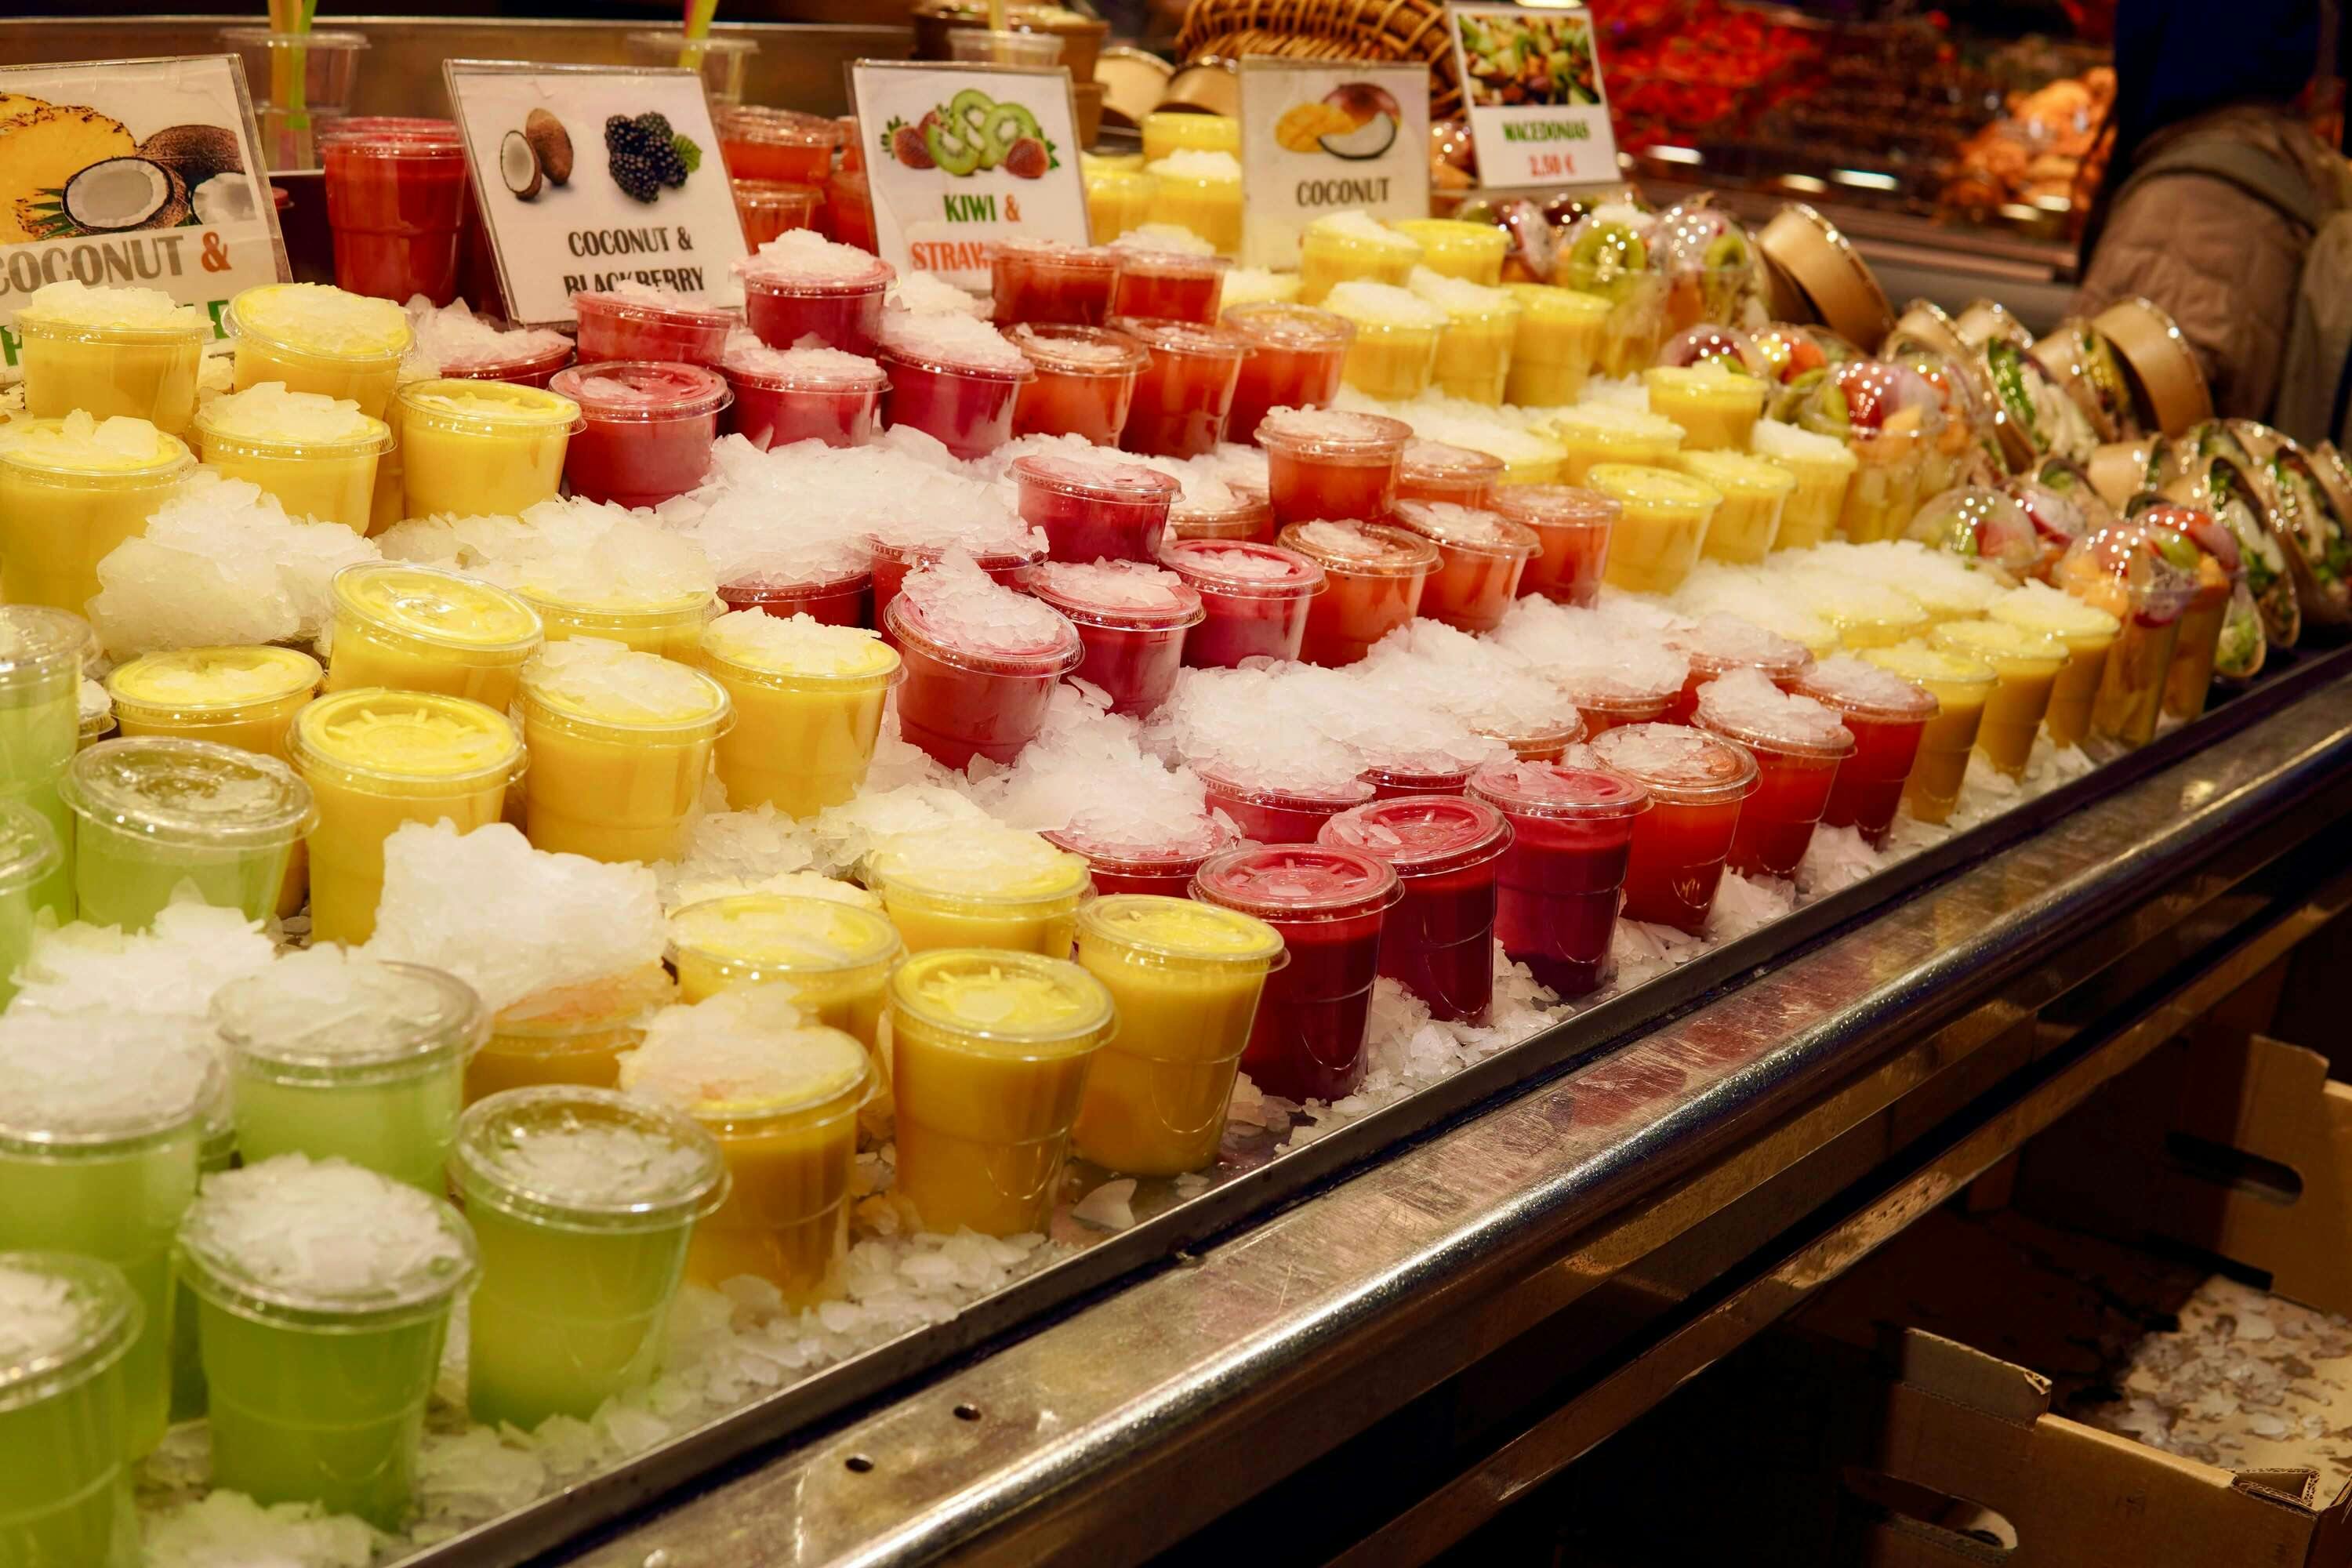 Rows of colorful cups on juice sitting in an ice cooler at a market